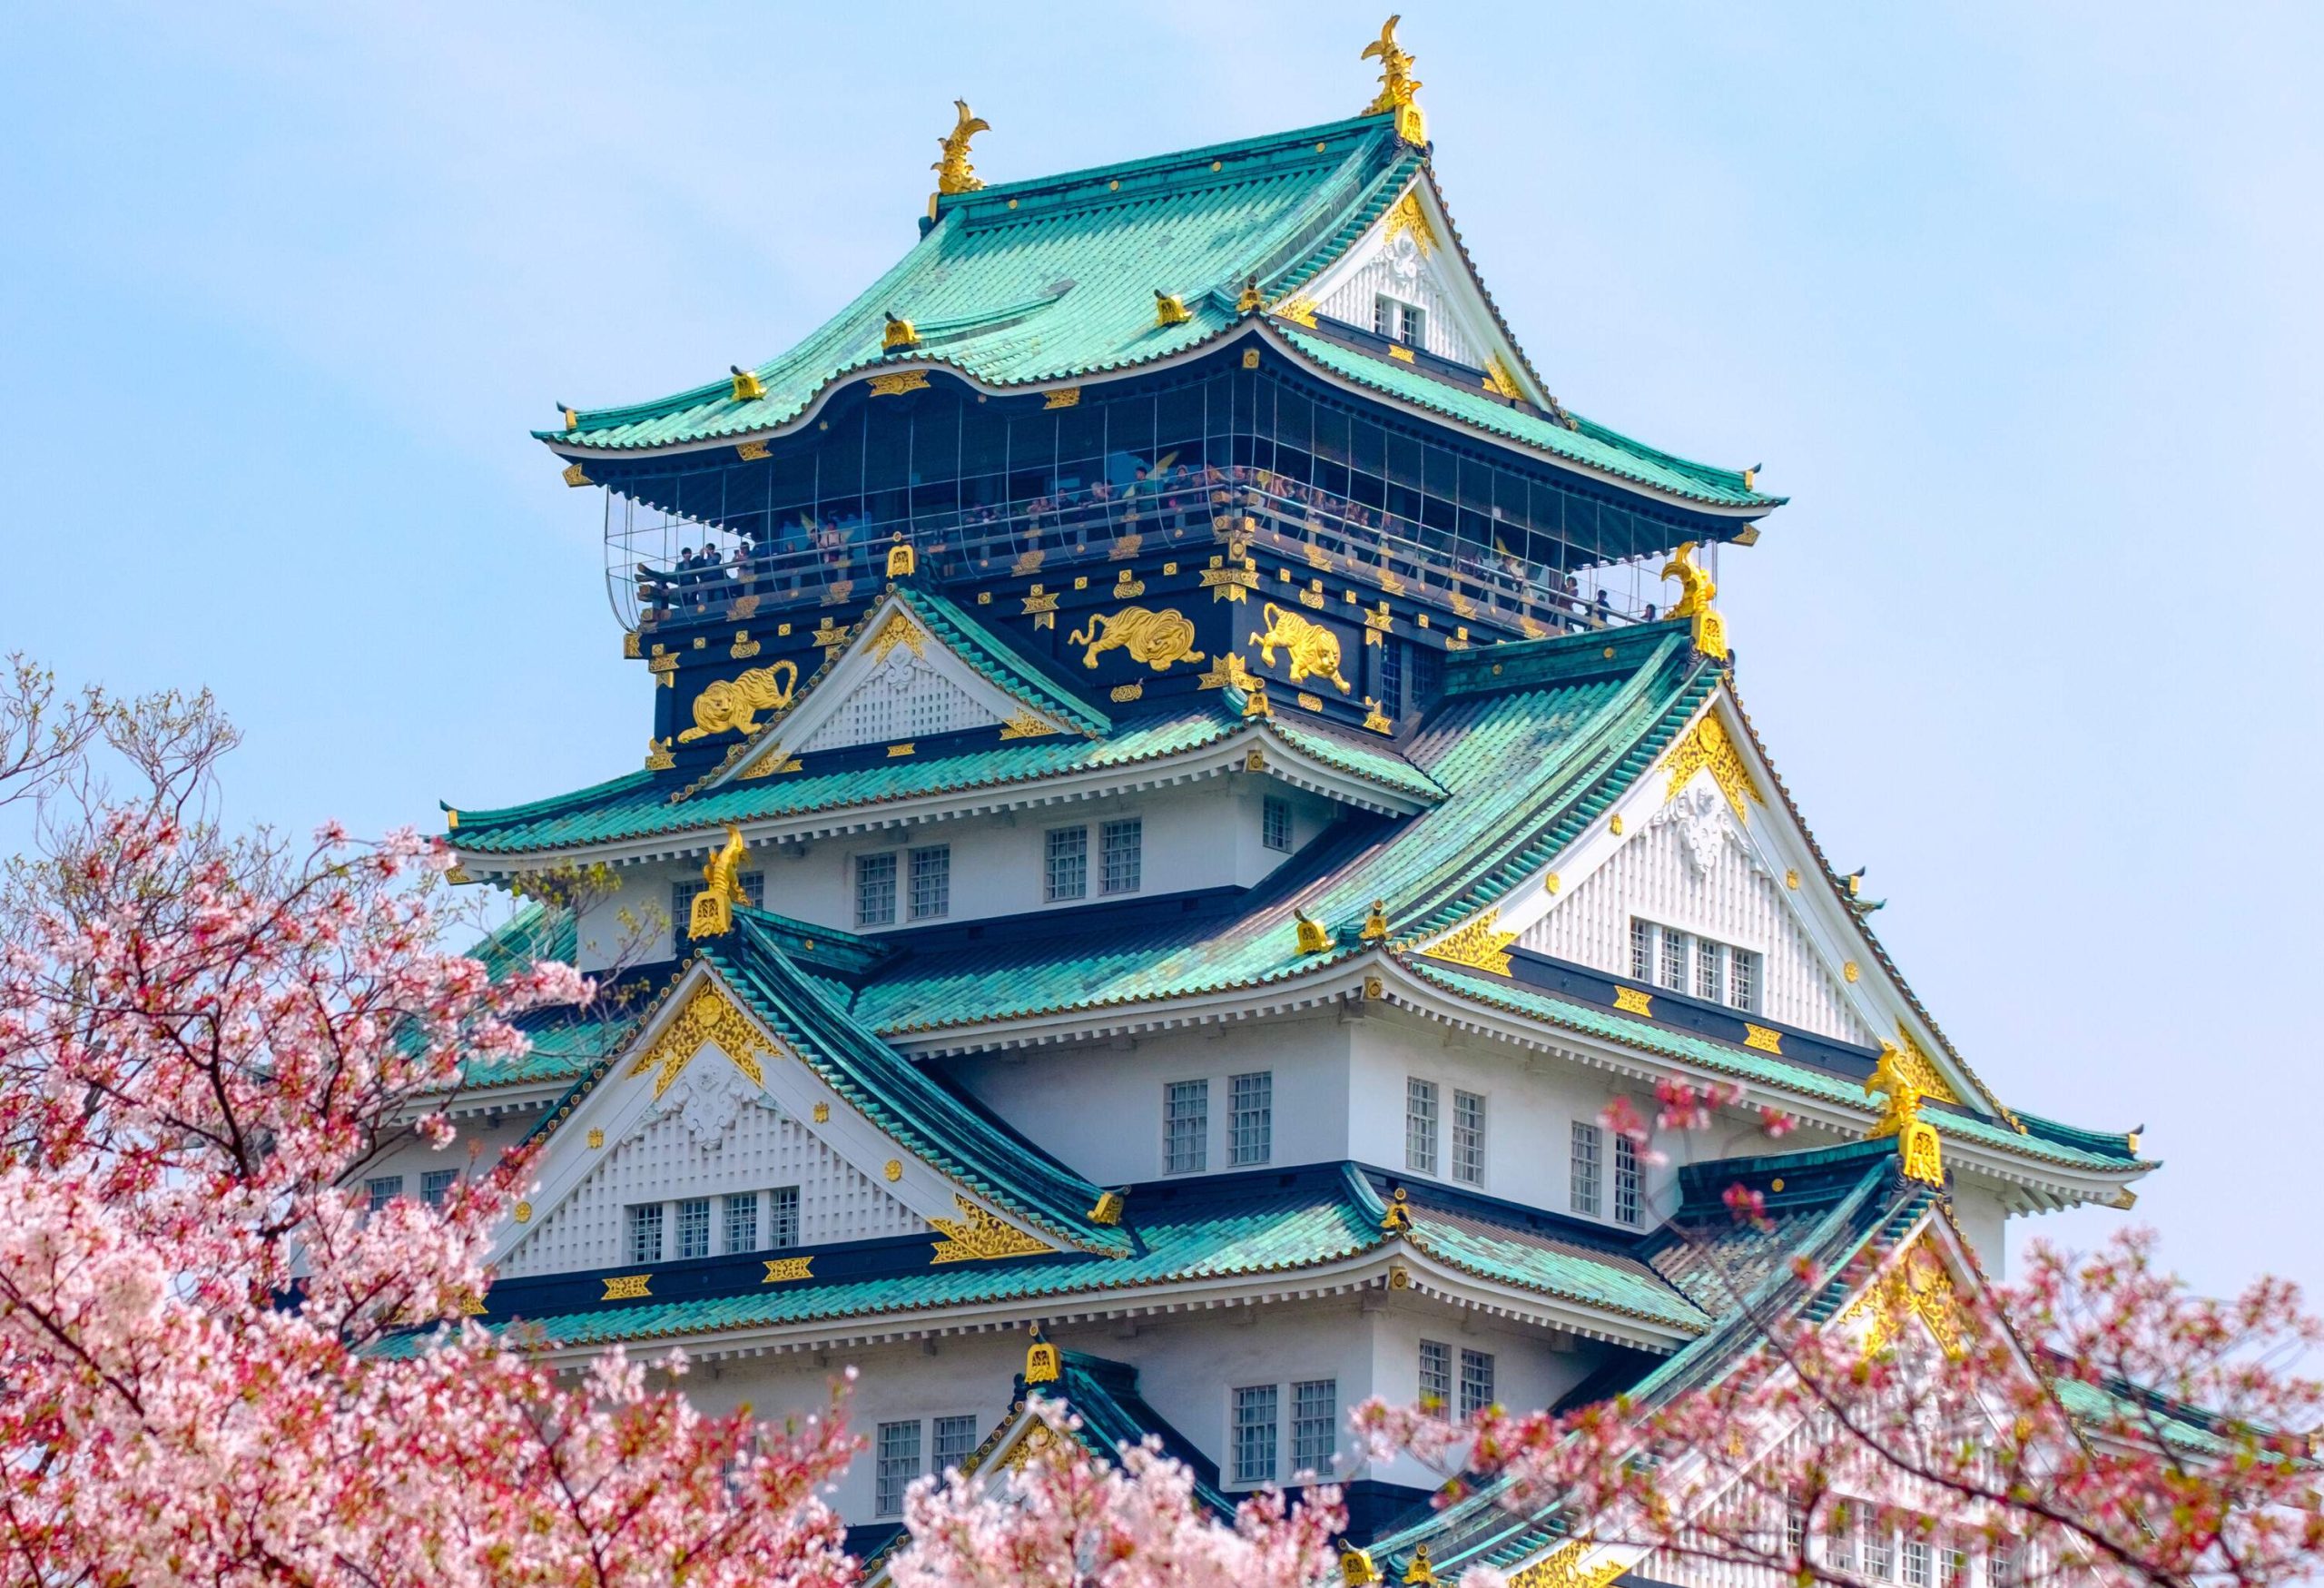 A castle with white stone walls and green roofs adorned with gold ornaments surrounded by blooming cherry trees.